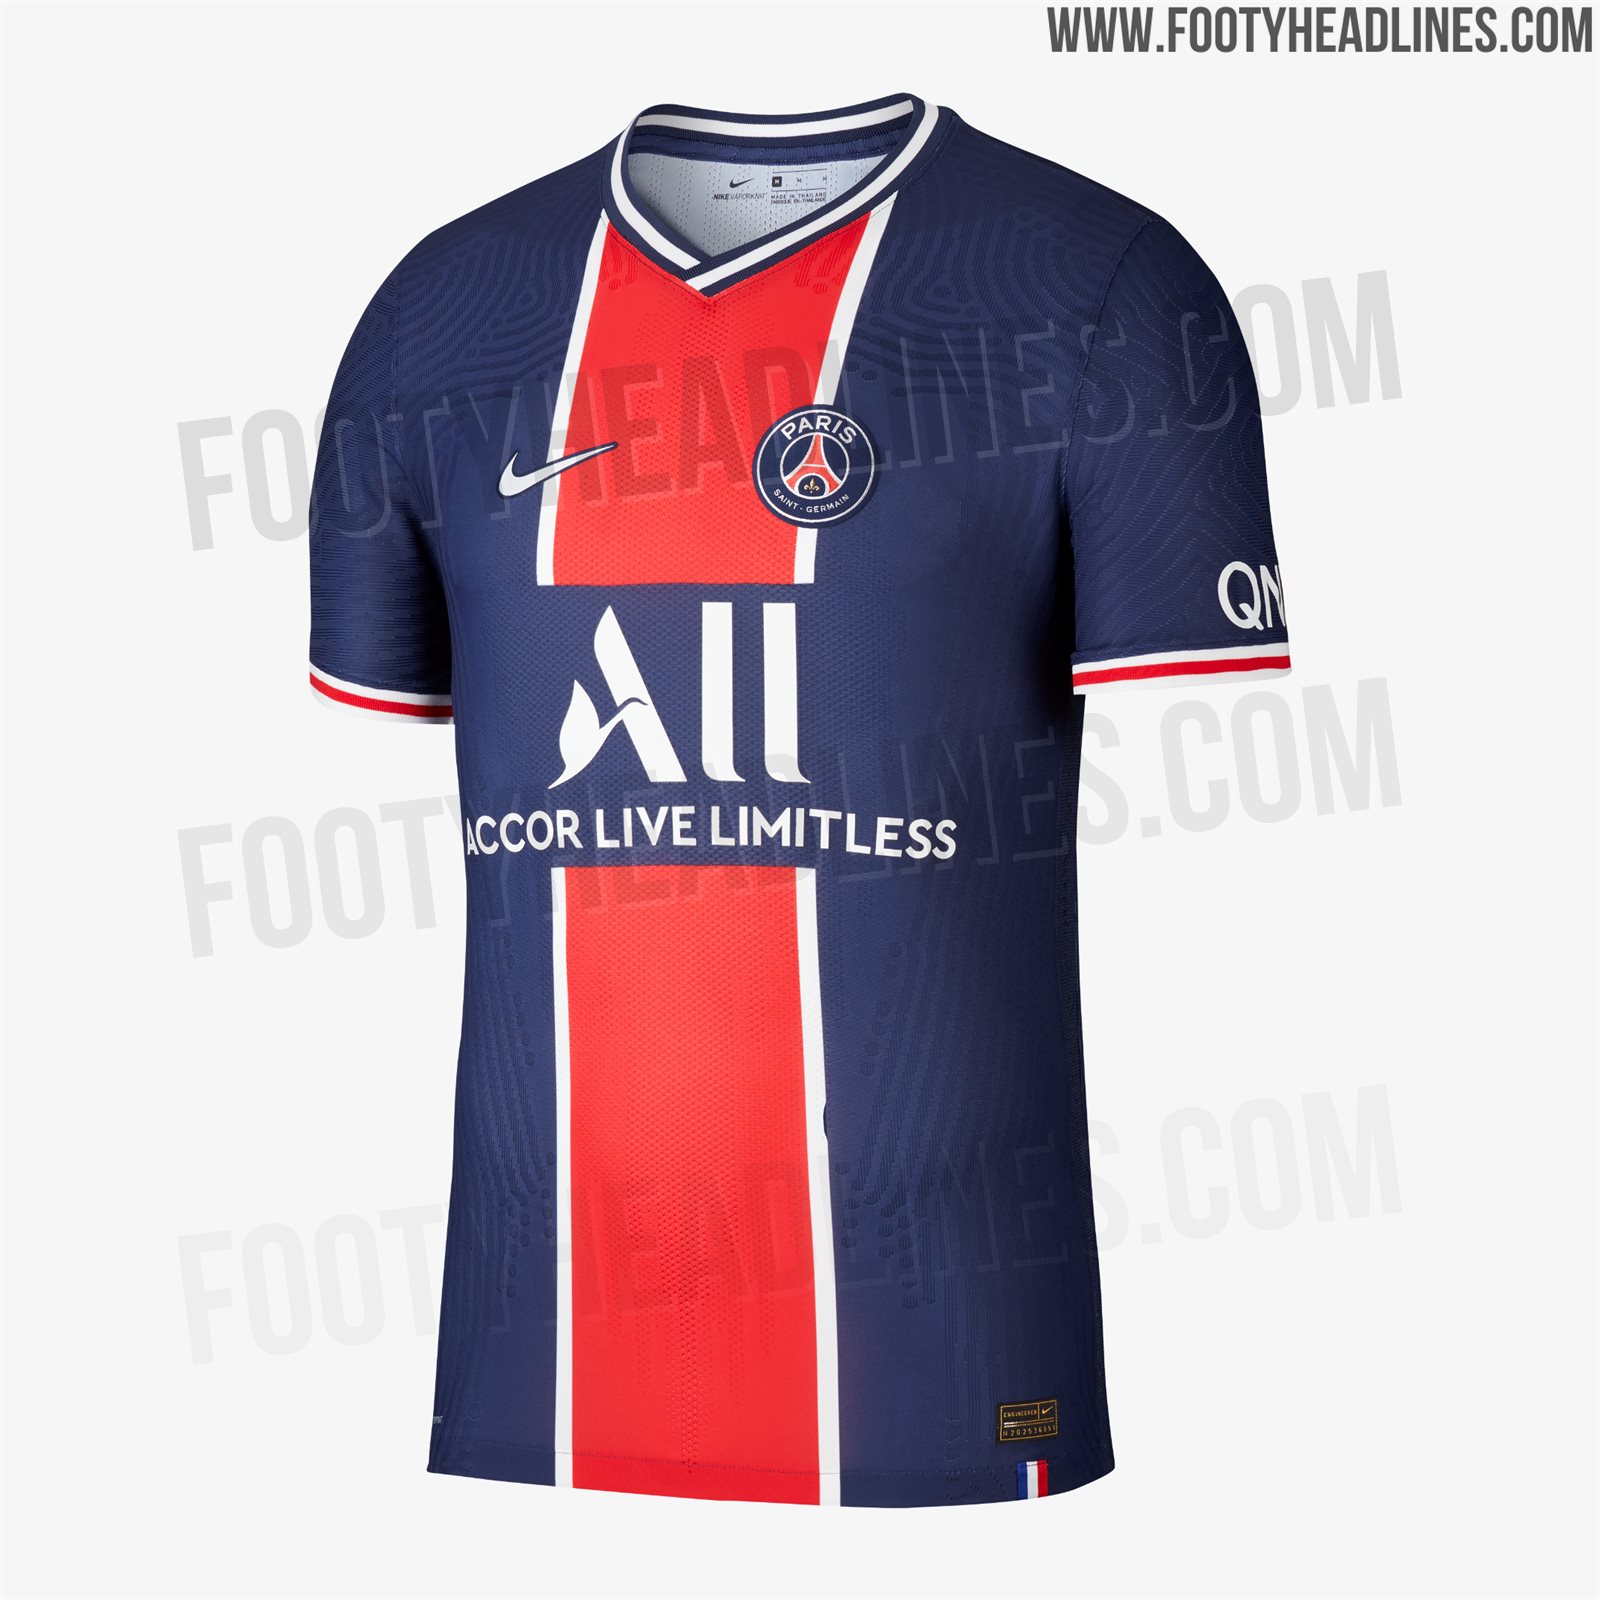 This Is How The PSG 21-22 Away Kit Could Look Like - Footy Headlines